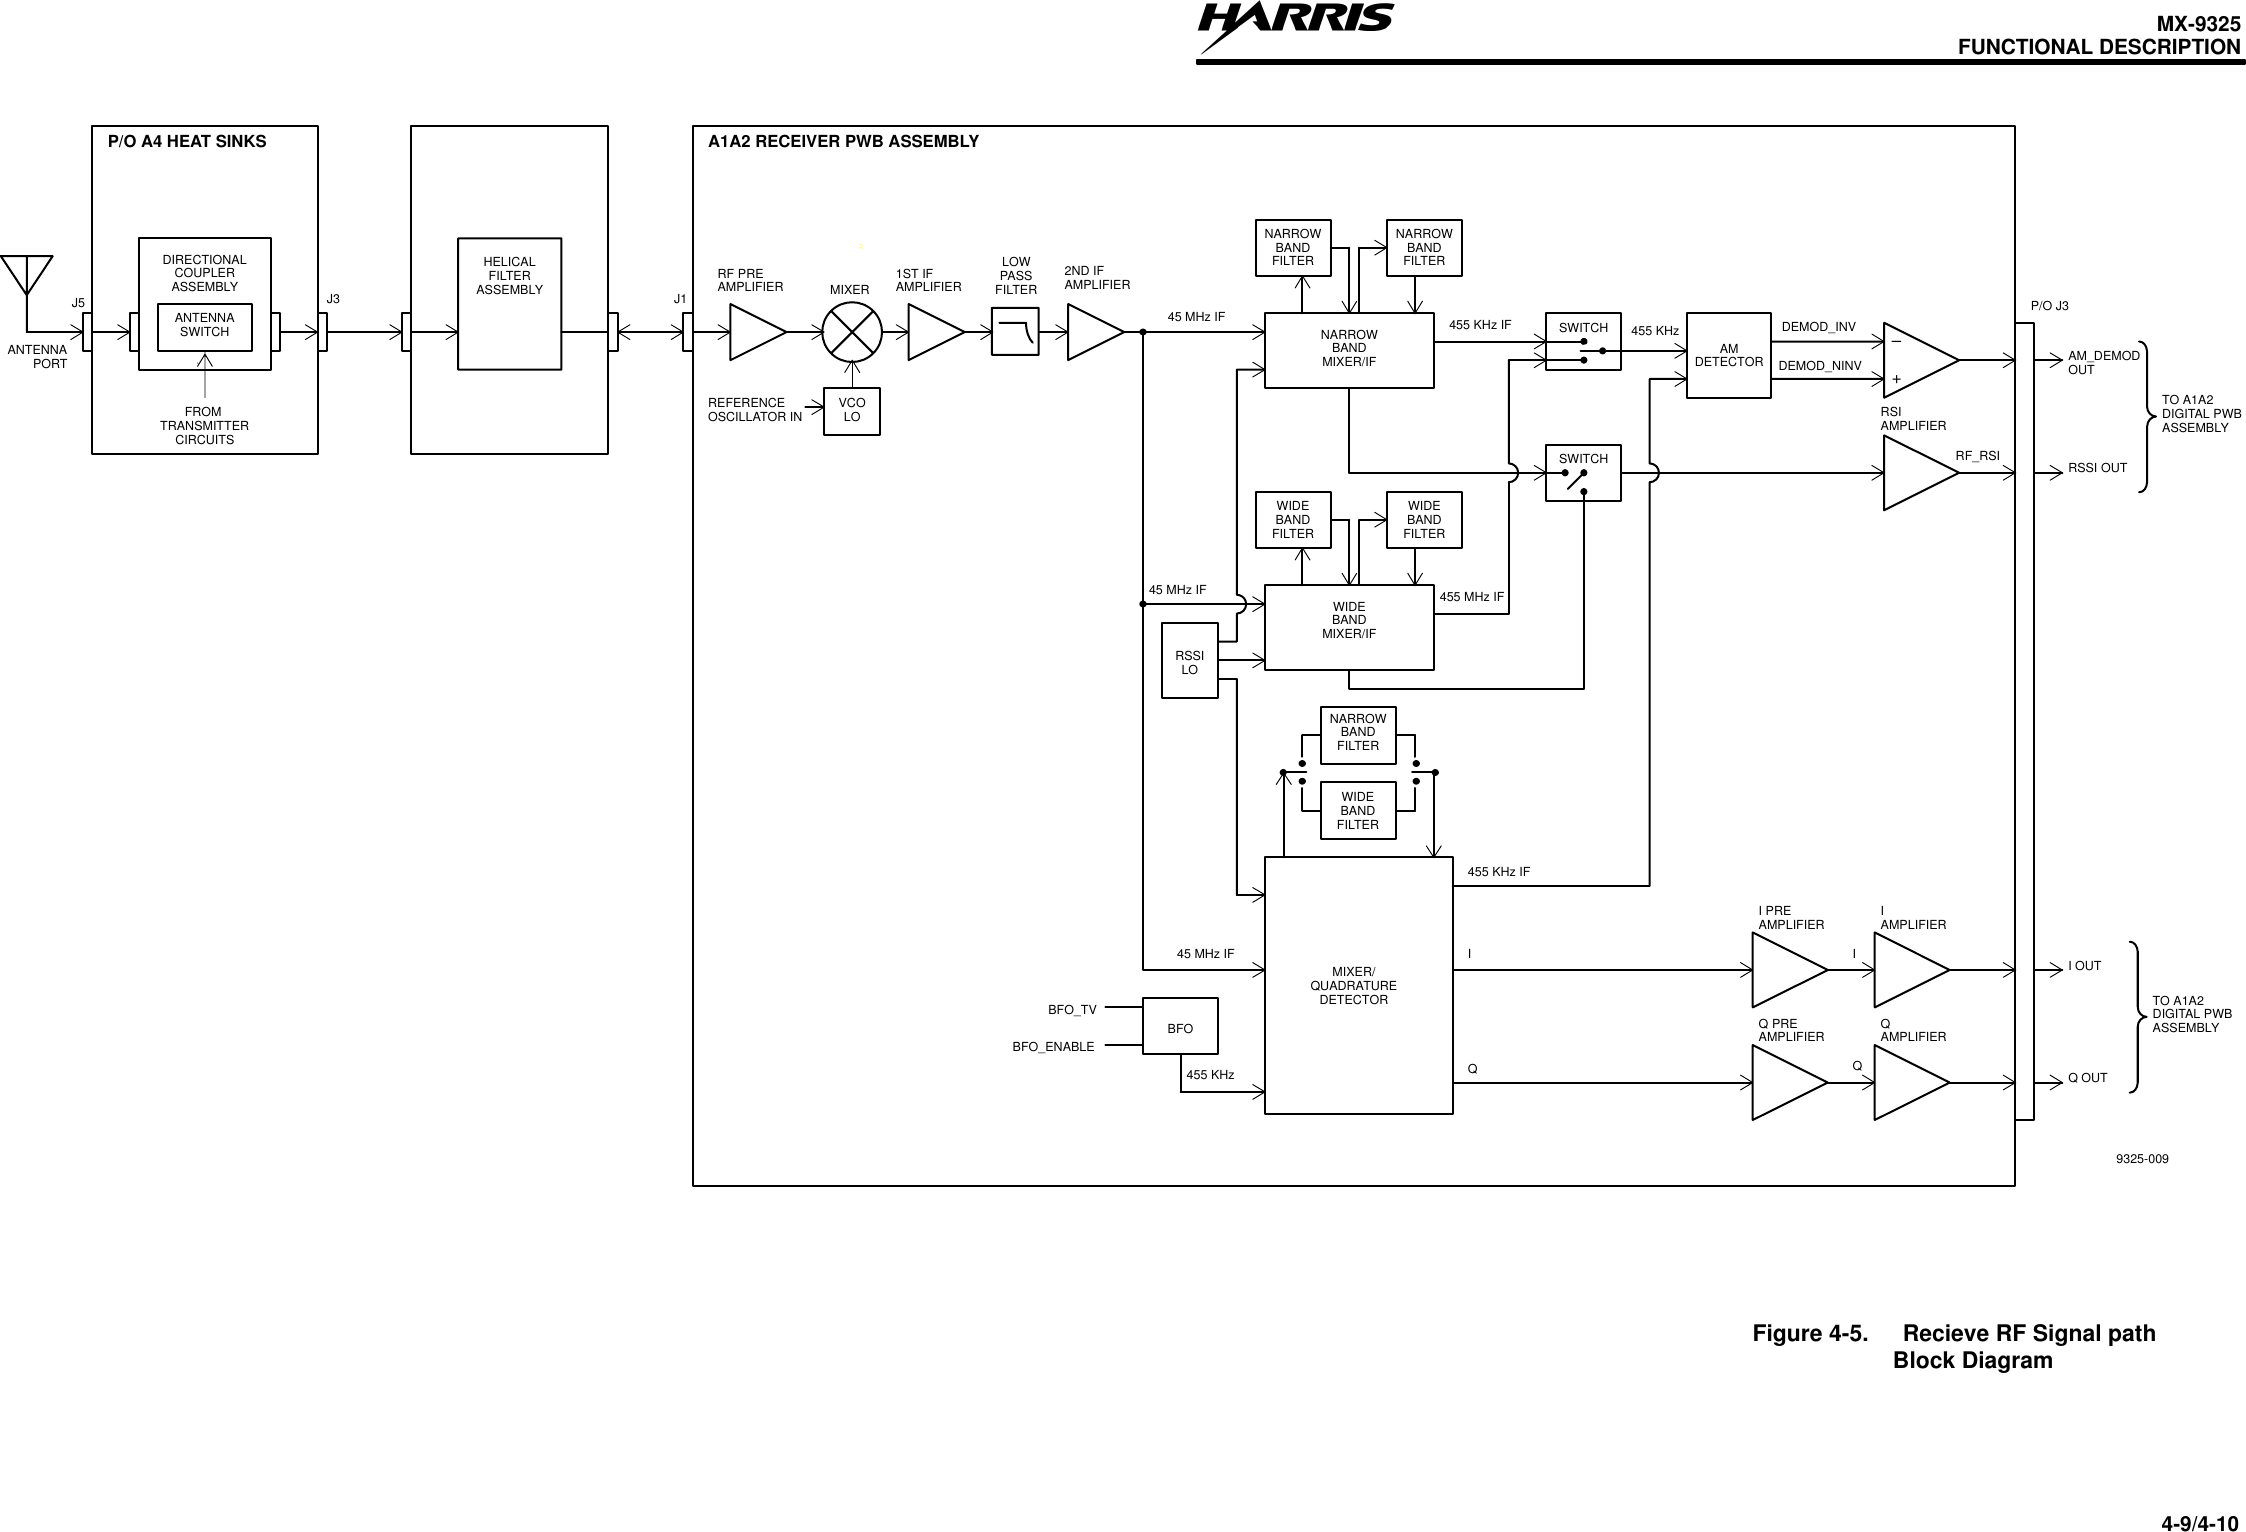 MX-9325FUNCTIONAL DESCRIPTION4-9/4-10A4Figure 4-5. Recieve RF Signal path                      Block Diagram9325-009J5DIRECTIONALCOUPLERASSEMBLYANTENNASWITCHFROM TRANSMITTERCIRCUITSANTENNAPORTHELICALFILTERASSEMBLYRF PREAMPLIFIER MIXERVCOLOREFERENCEOSCILLATOR IN1ST IFAMPLIFIERLOWPASSFILTER2ND IFAMPLIFIER45 MHz IFNARROWBANDFILTERNARROWBANDFILTERNARROWBANDMIXER/IFWIDEBANDMIXER/IFIAMPLIFIERI OUTI PREAMPLIFIERIQAMPLIFIERQ PREAMPLIFIERQQ OUTMIXER/QUADRATUREDETECTORIQTO A1A2DIGITAL PWBASSEMBLYBFO_TVBFO_ENABLEBFONARROWBANDFILTERWIDEBANDFILTERWIDEBANDFILTERWIDEBANDFILTERSWITCHRSIAMPLIFIERRF_RSI RSSI OUTSWITCH455 MHz IFAMDETECTORDEMOD_INVDEMOD_NINV +–AM_DEMODOUTRSSILO45 MHz IF45 MHz IF455 KHz455 KHz455 KHz IF455 KHz IFTO A1A2DIGITAL PWBASSEMBLYP/O A4 HEAT SINKSJ3 J1A1A2 RECEIVER PWB ASSEMBLYP/O J3